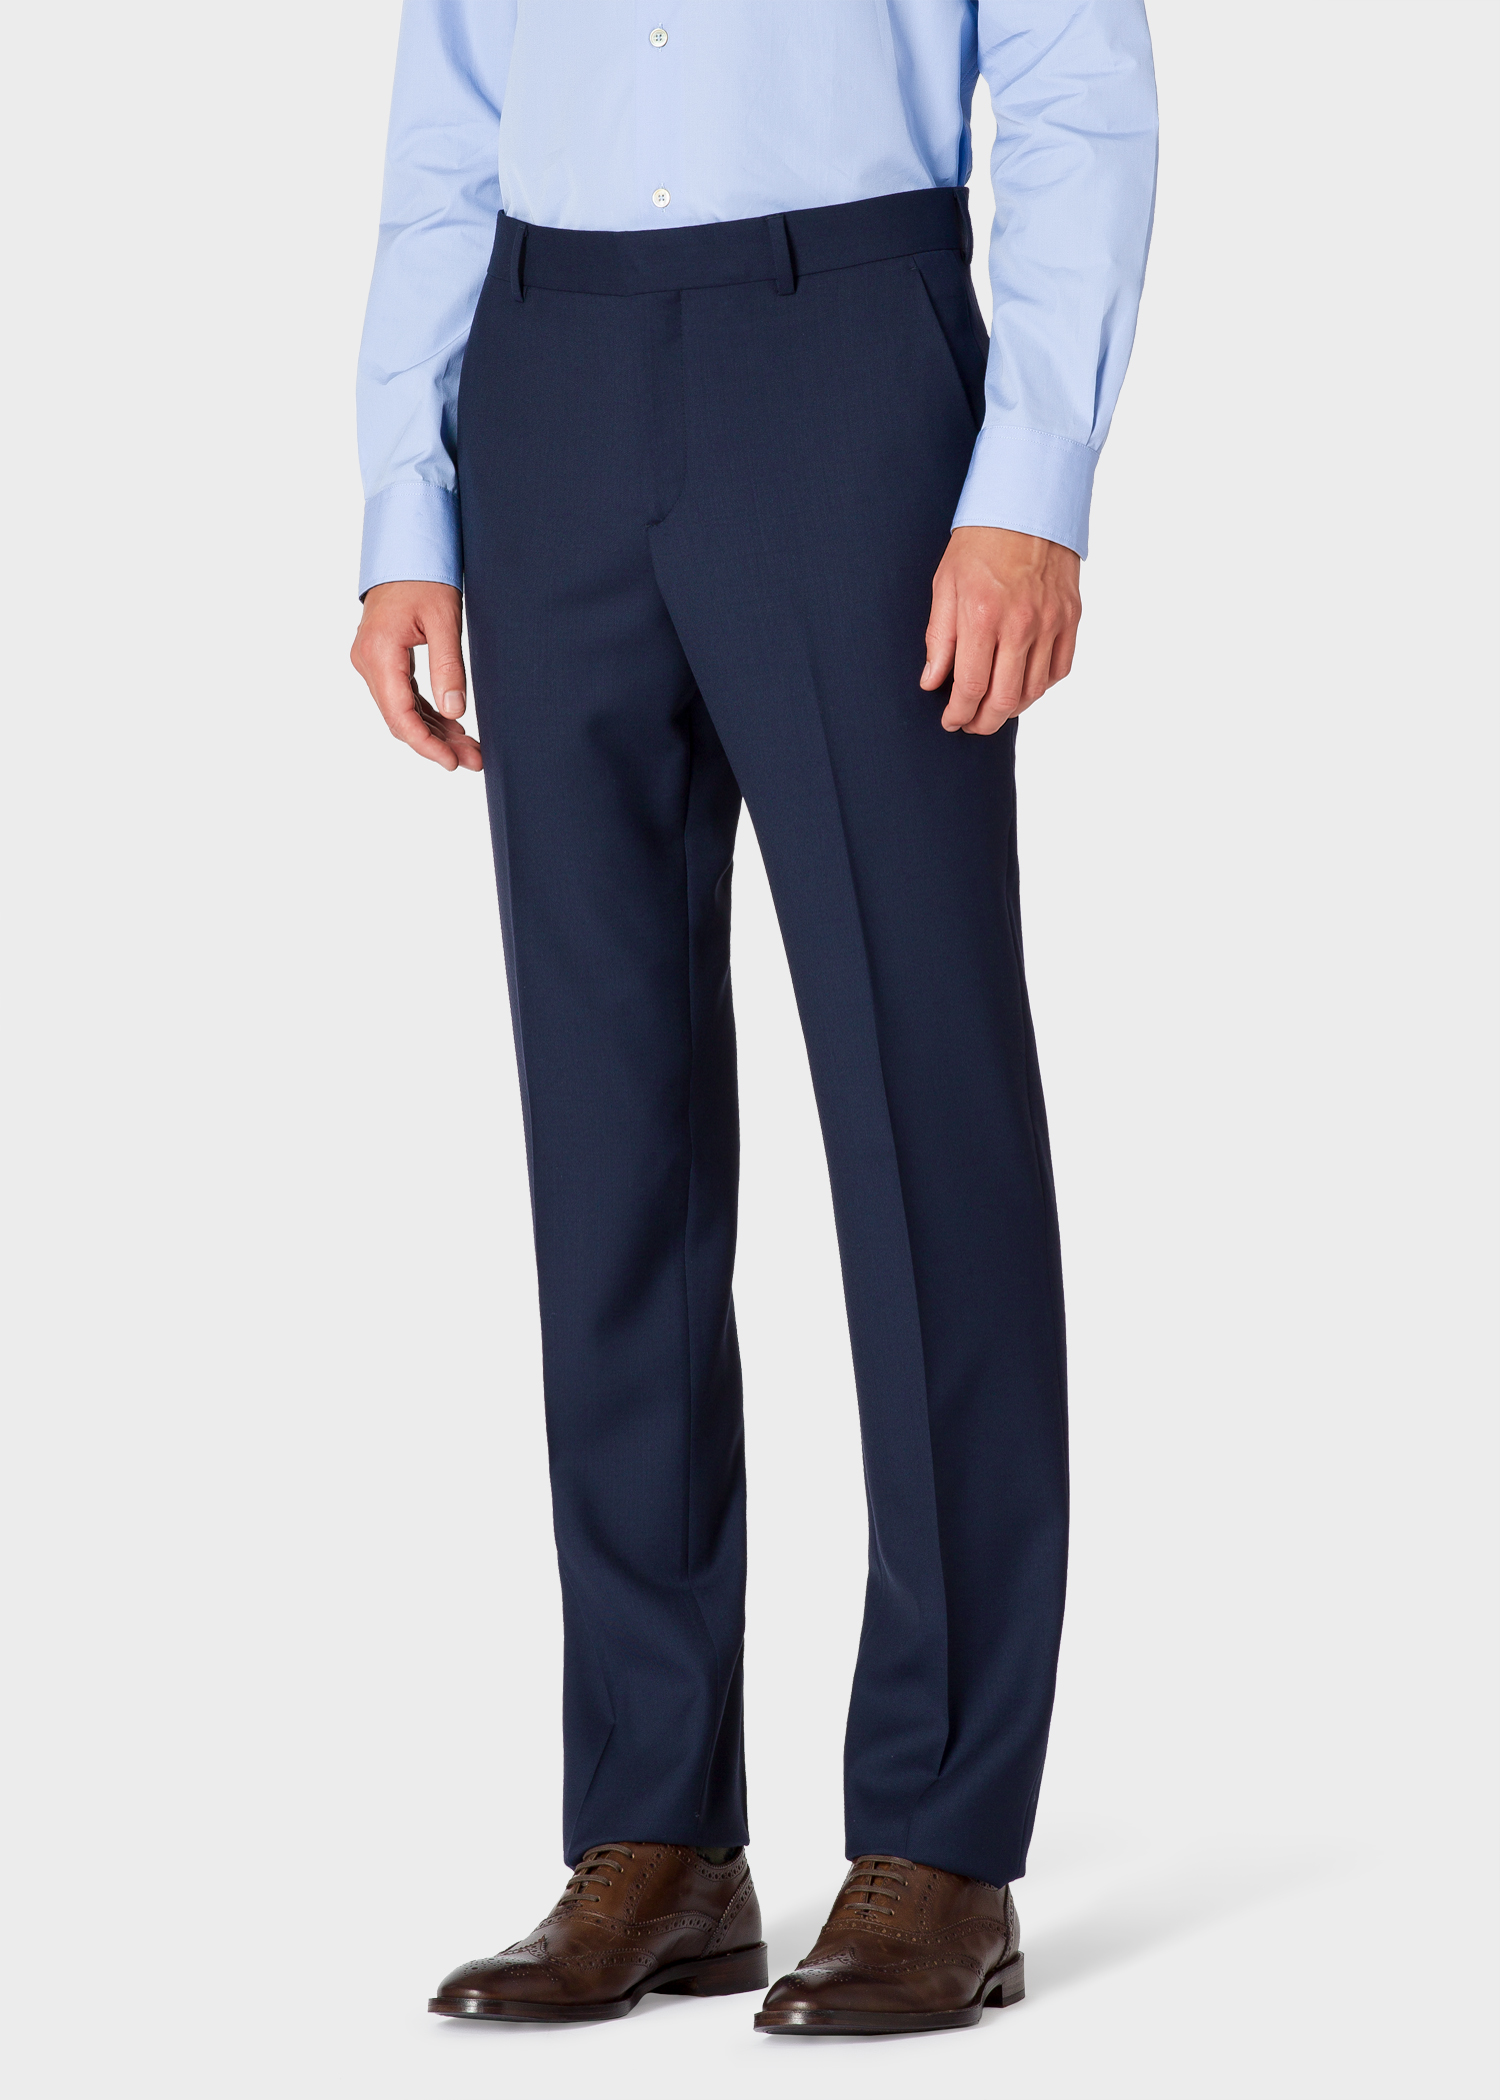 Model front pants view - The Piccadilly - Men's Tailored-Fit Navy Blue Wool Suit 'A Suit To Travel In'